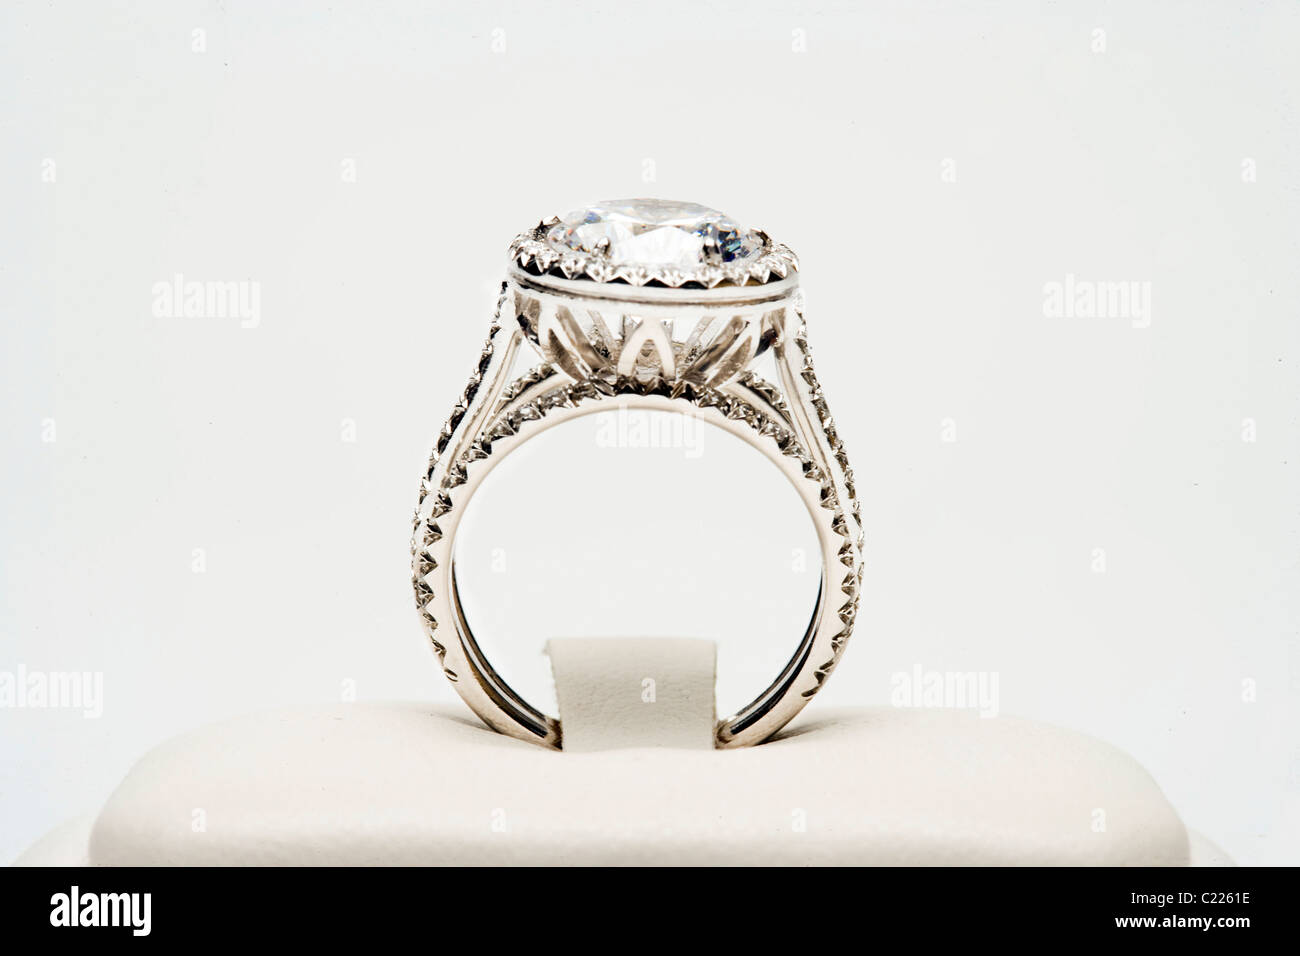 Platinum ring with 5 carat centre diamond surrounded by full cut 0.80 carat diamonds Stock Photo